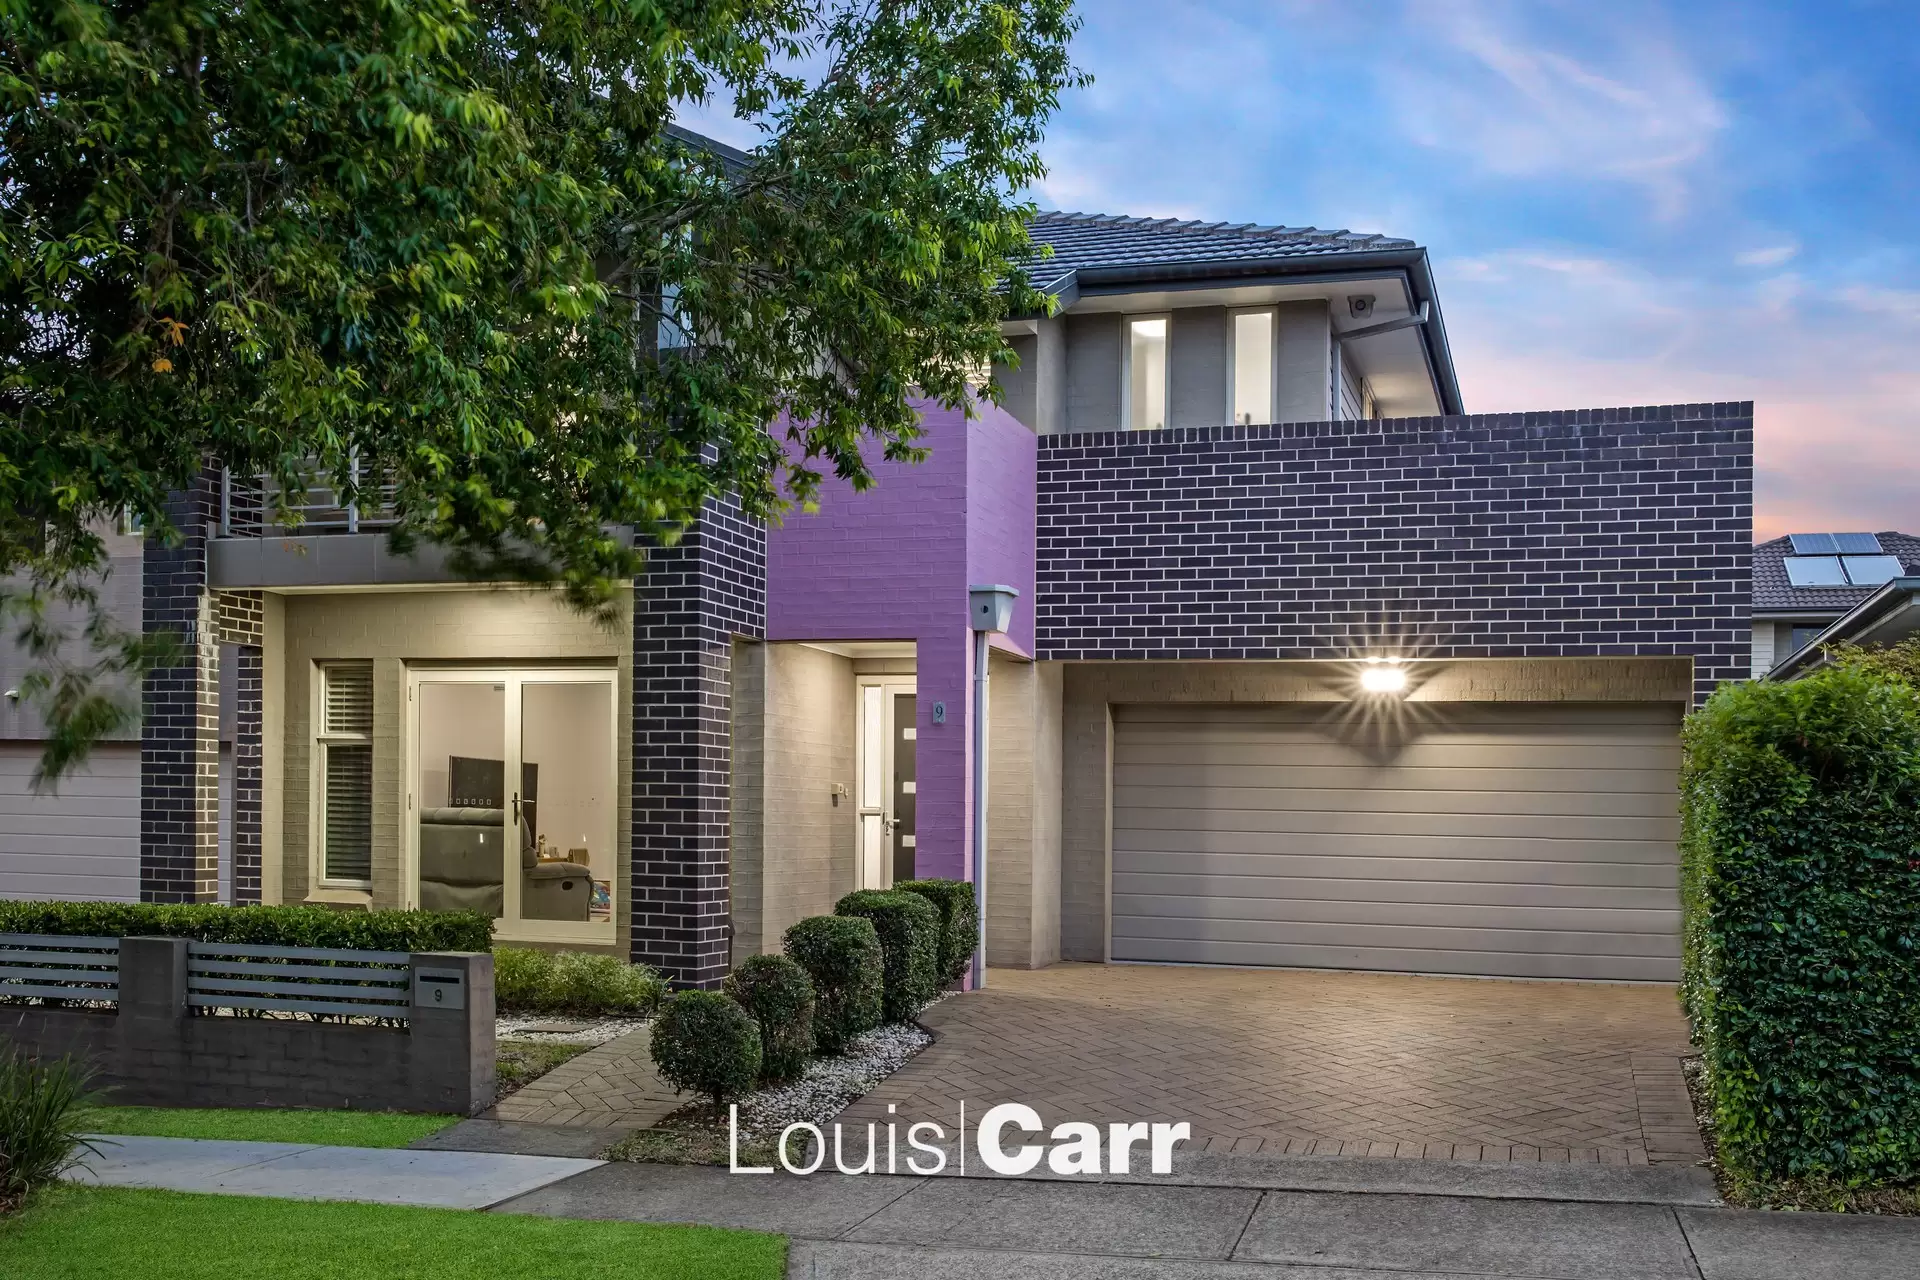 Photo #1: 9 Freshwater Road, Rouse Hill - For Sale by Louis Carr Real Estate